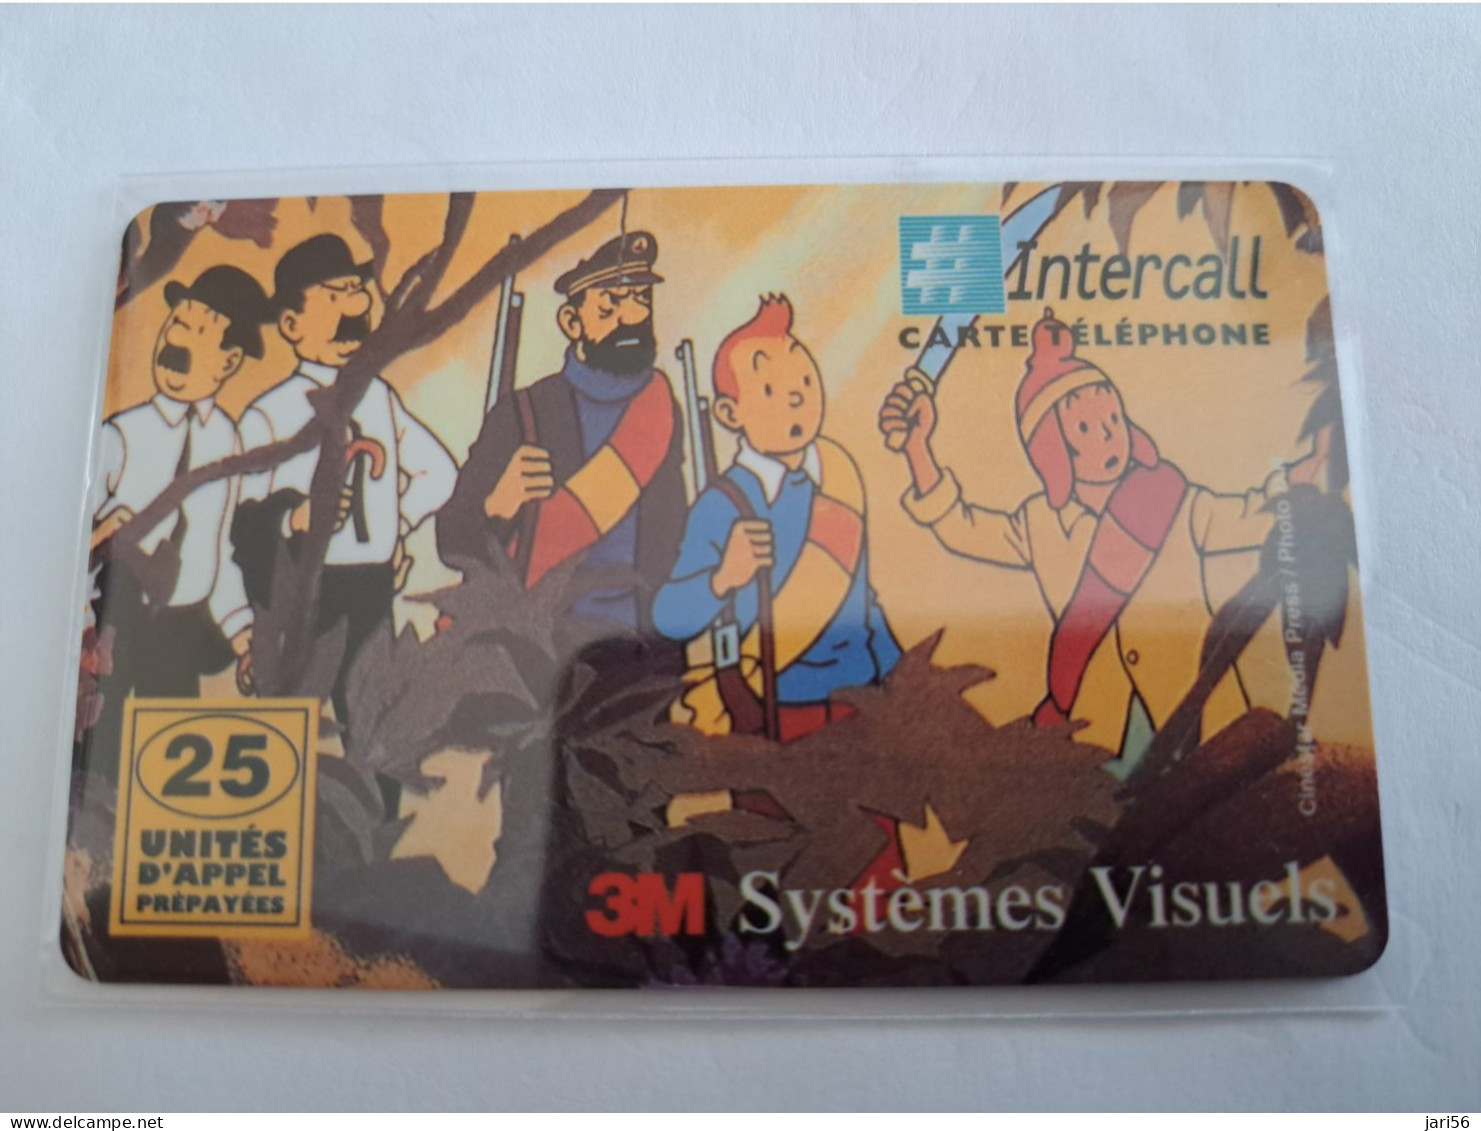 FRANCE/  /PREPAID  /INTERCALL/ TIN TIN / KUIFJE /  /3M SYSTEMS / 25 UNITS/ TIRAGE 3700 EX!!  / MINT CARD    ** 15015** - Voorafbetaalde Kaarten: Gsm